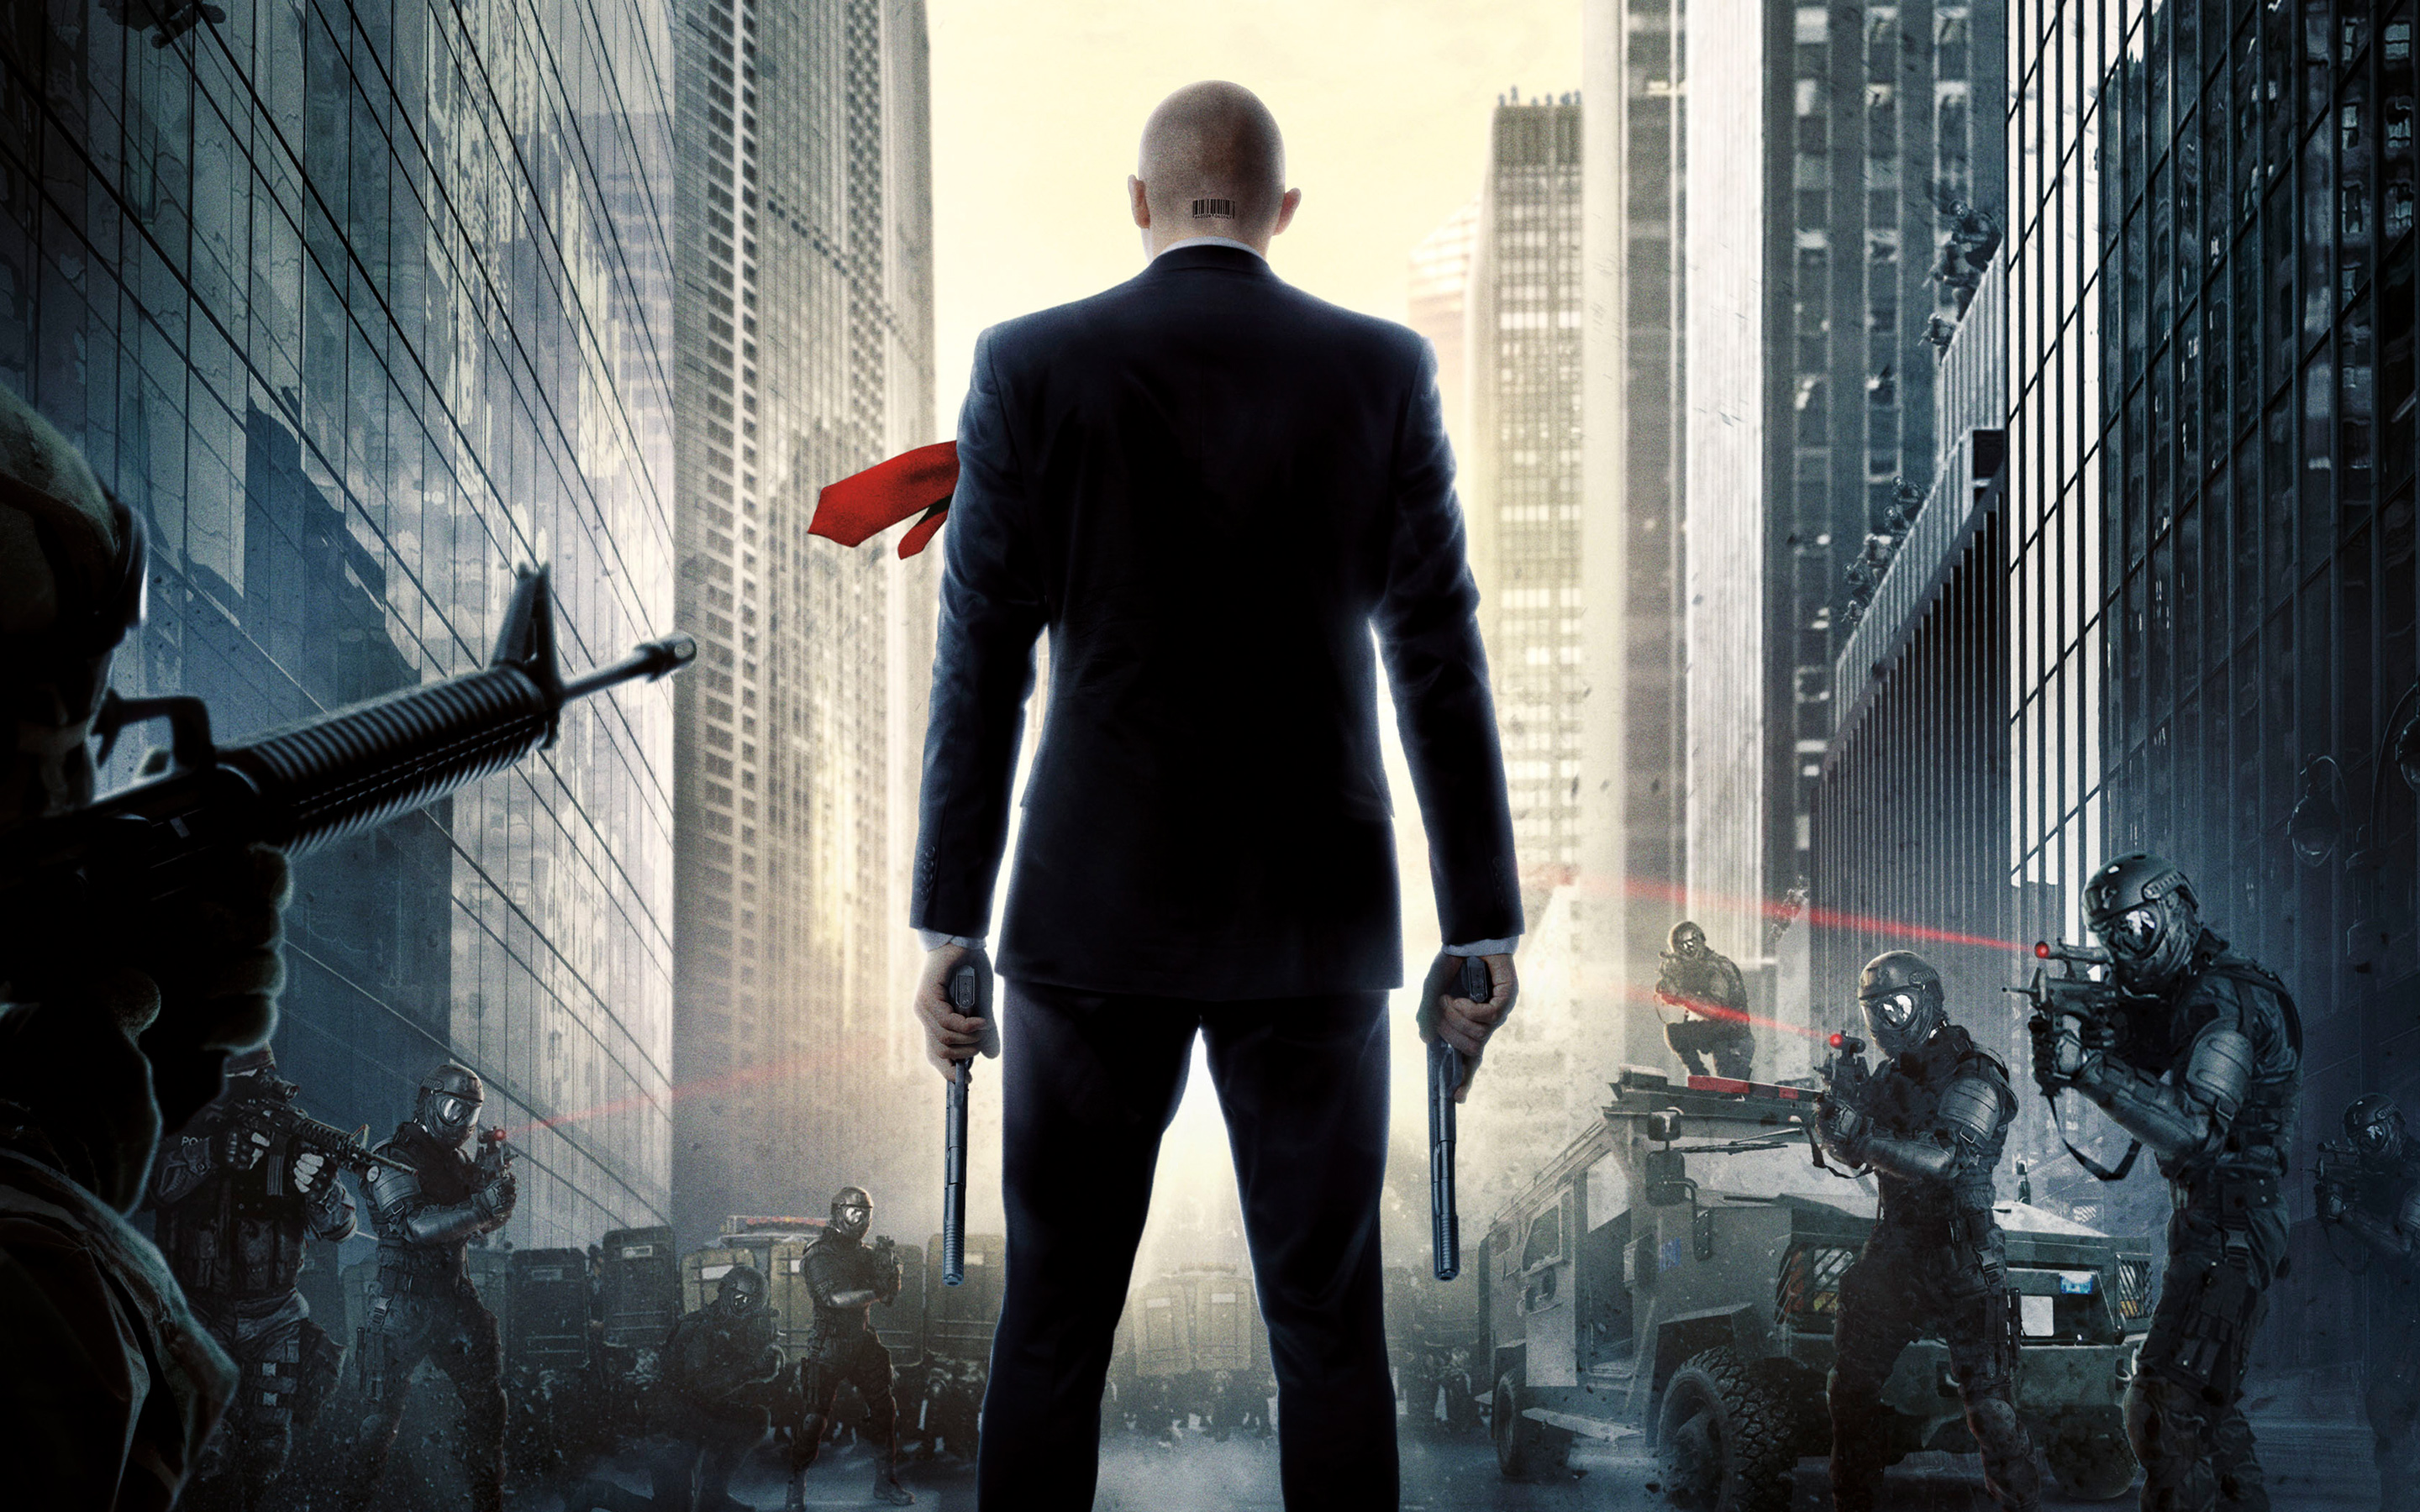 Free Download Hitman Agent 47 15 Movie Wallpapers Hd Wallpapers x1800 For Your Desktop Mobile Tablet Explore 75 Hitman Wallpapers Hitman Blood Money Wallpaper Katekyo Hitman Reborn Wallpaper Hitman Absolution Wallpaper